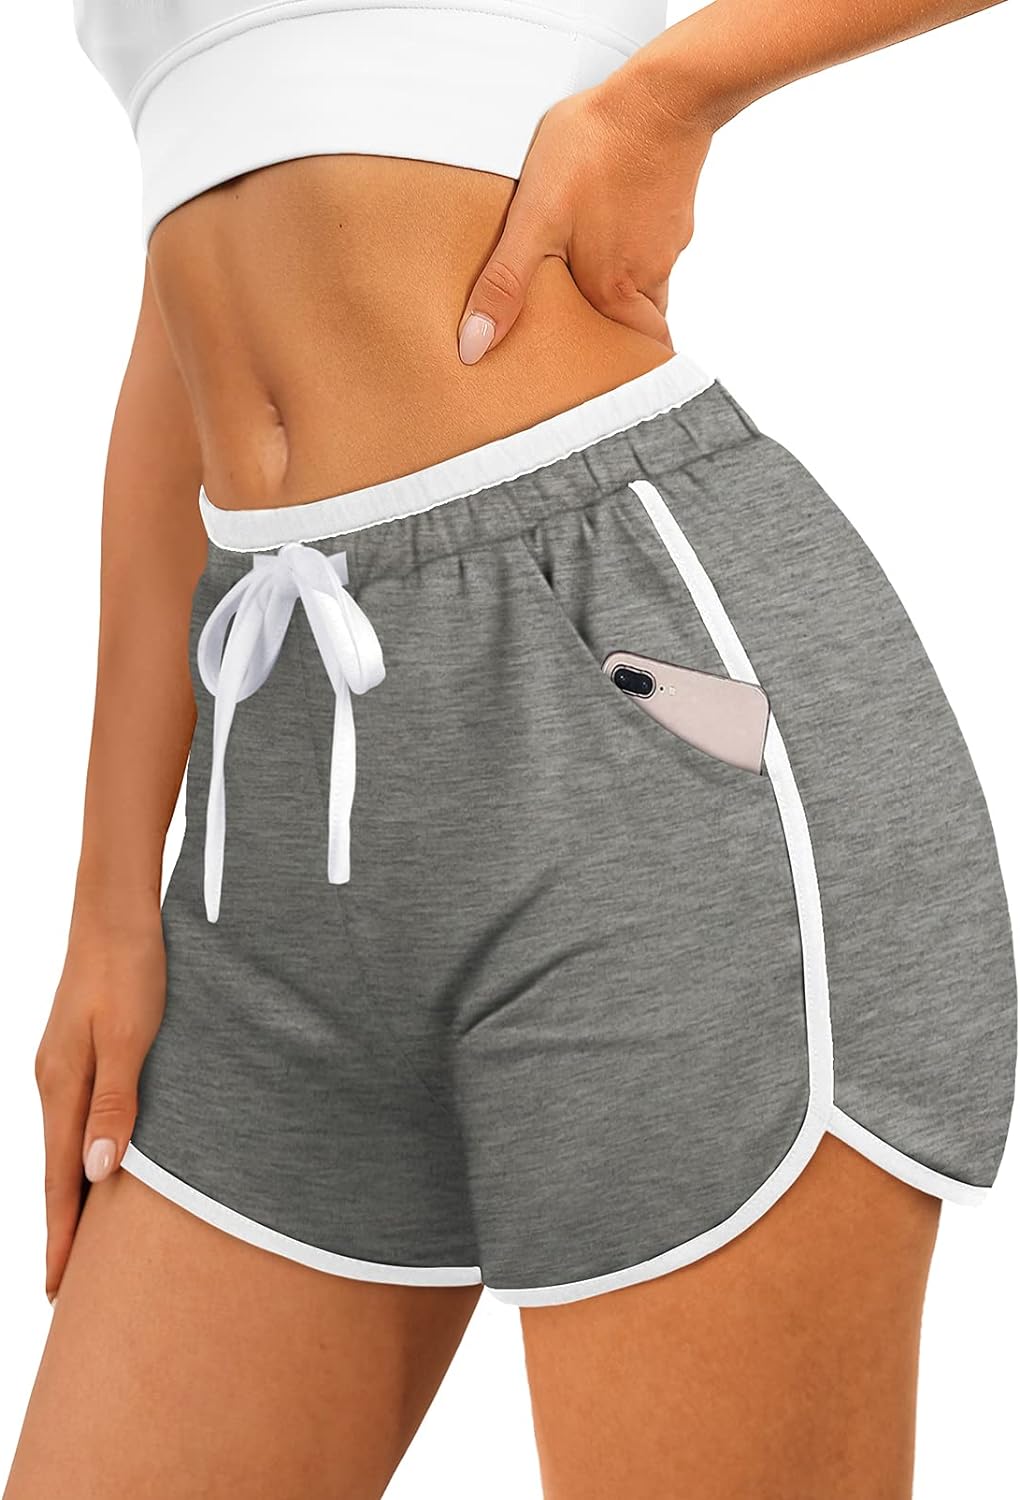 OFEEFAN Womens Athletic Shorts Running Dolphin Shorts with Pockets and Drawstring